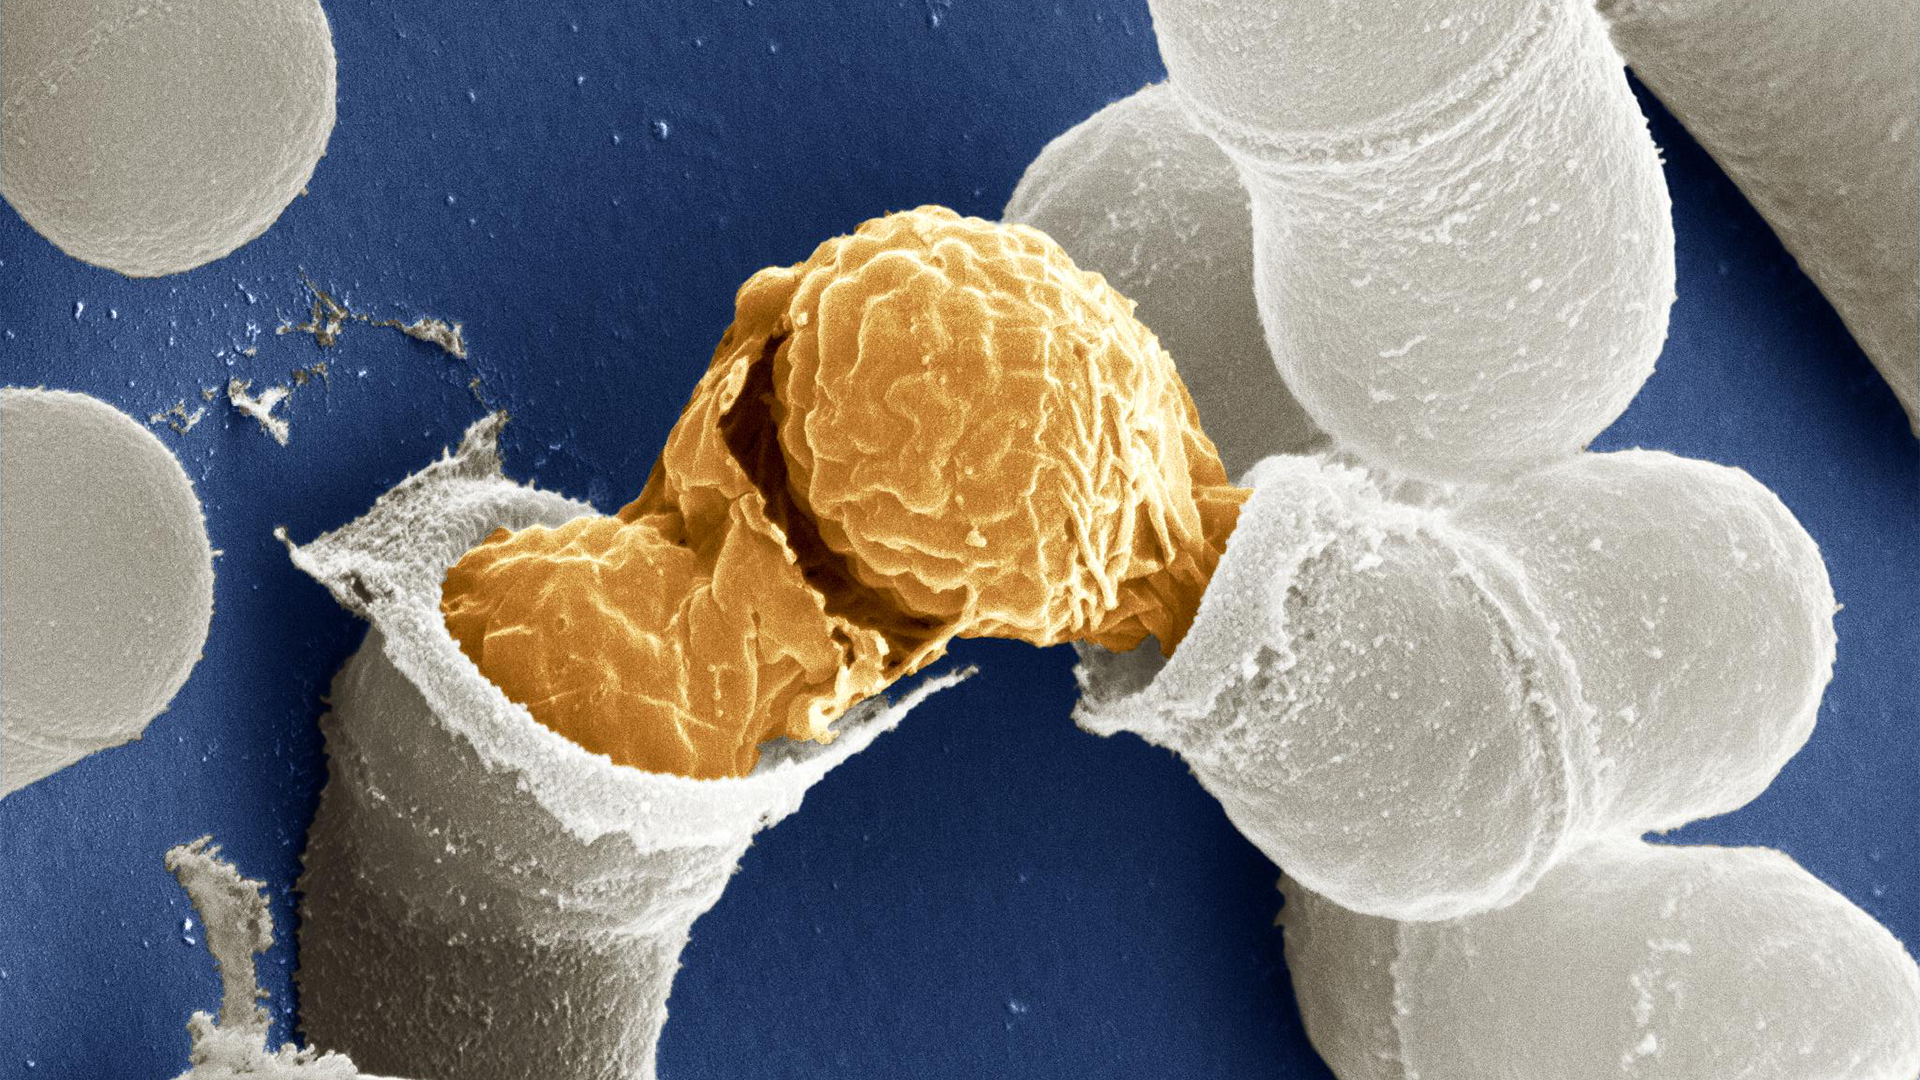 Birth of a yeast cell